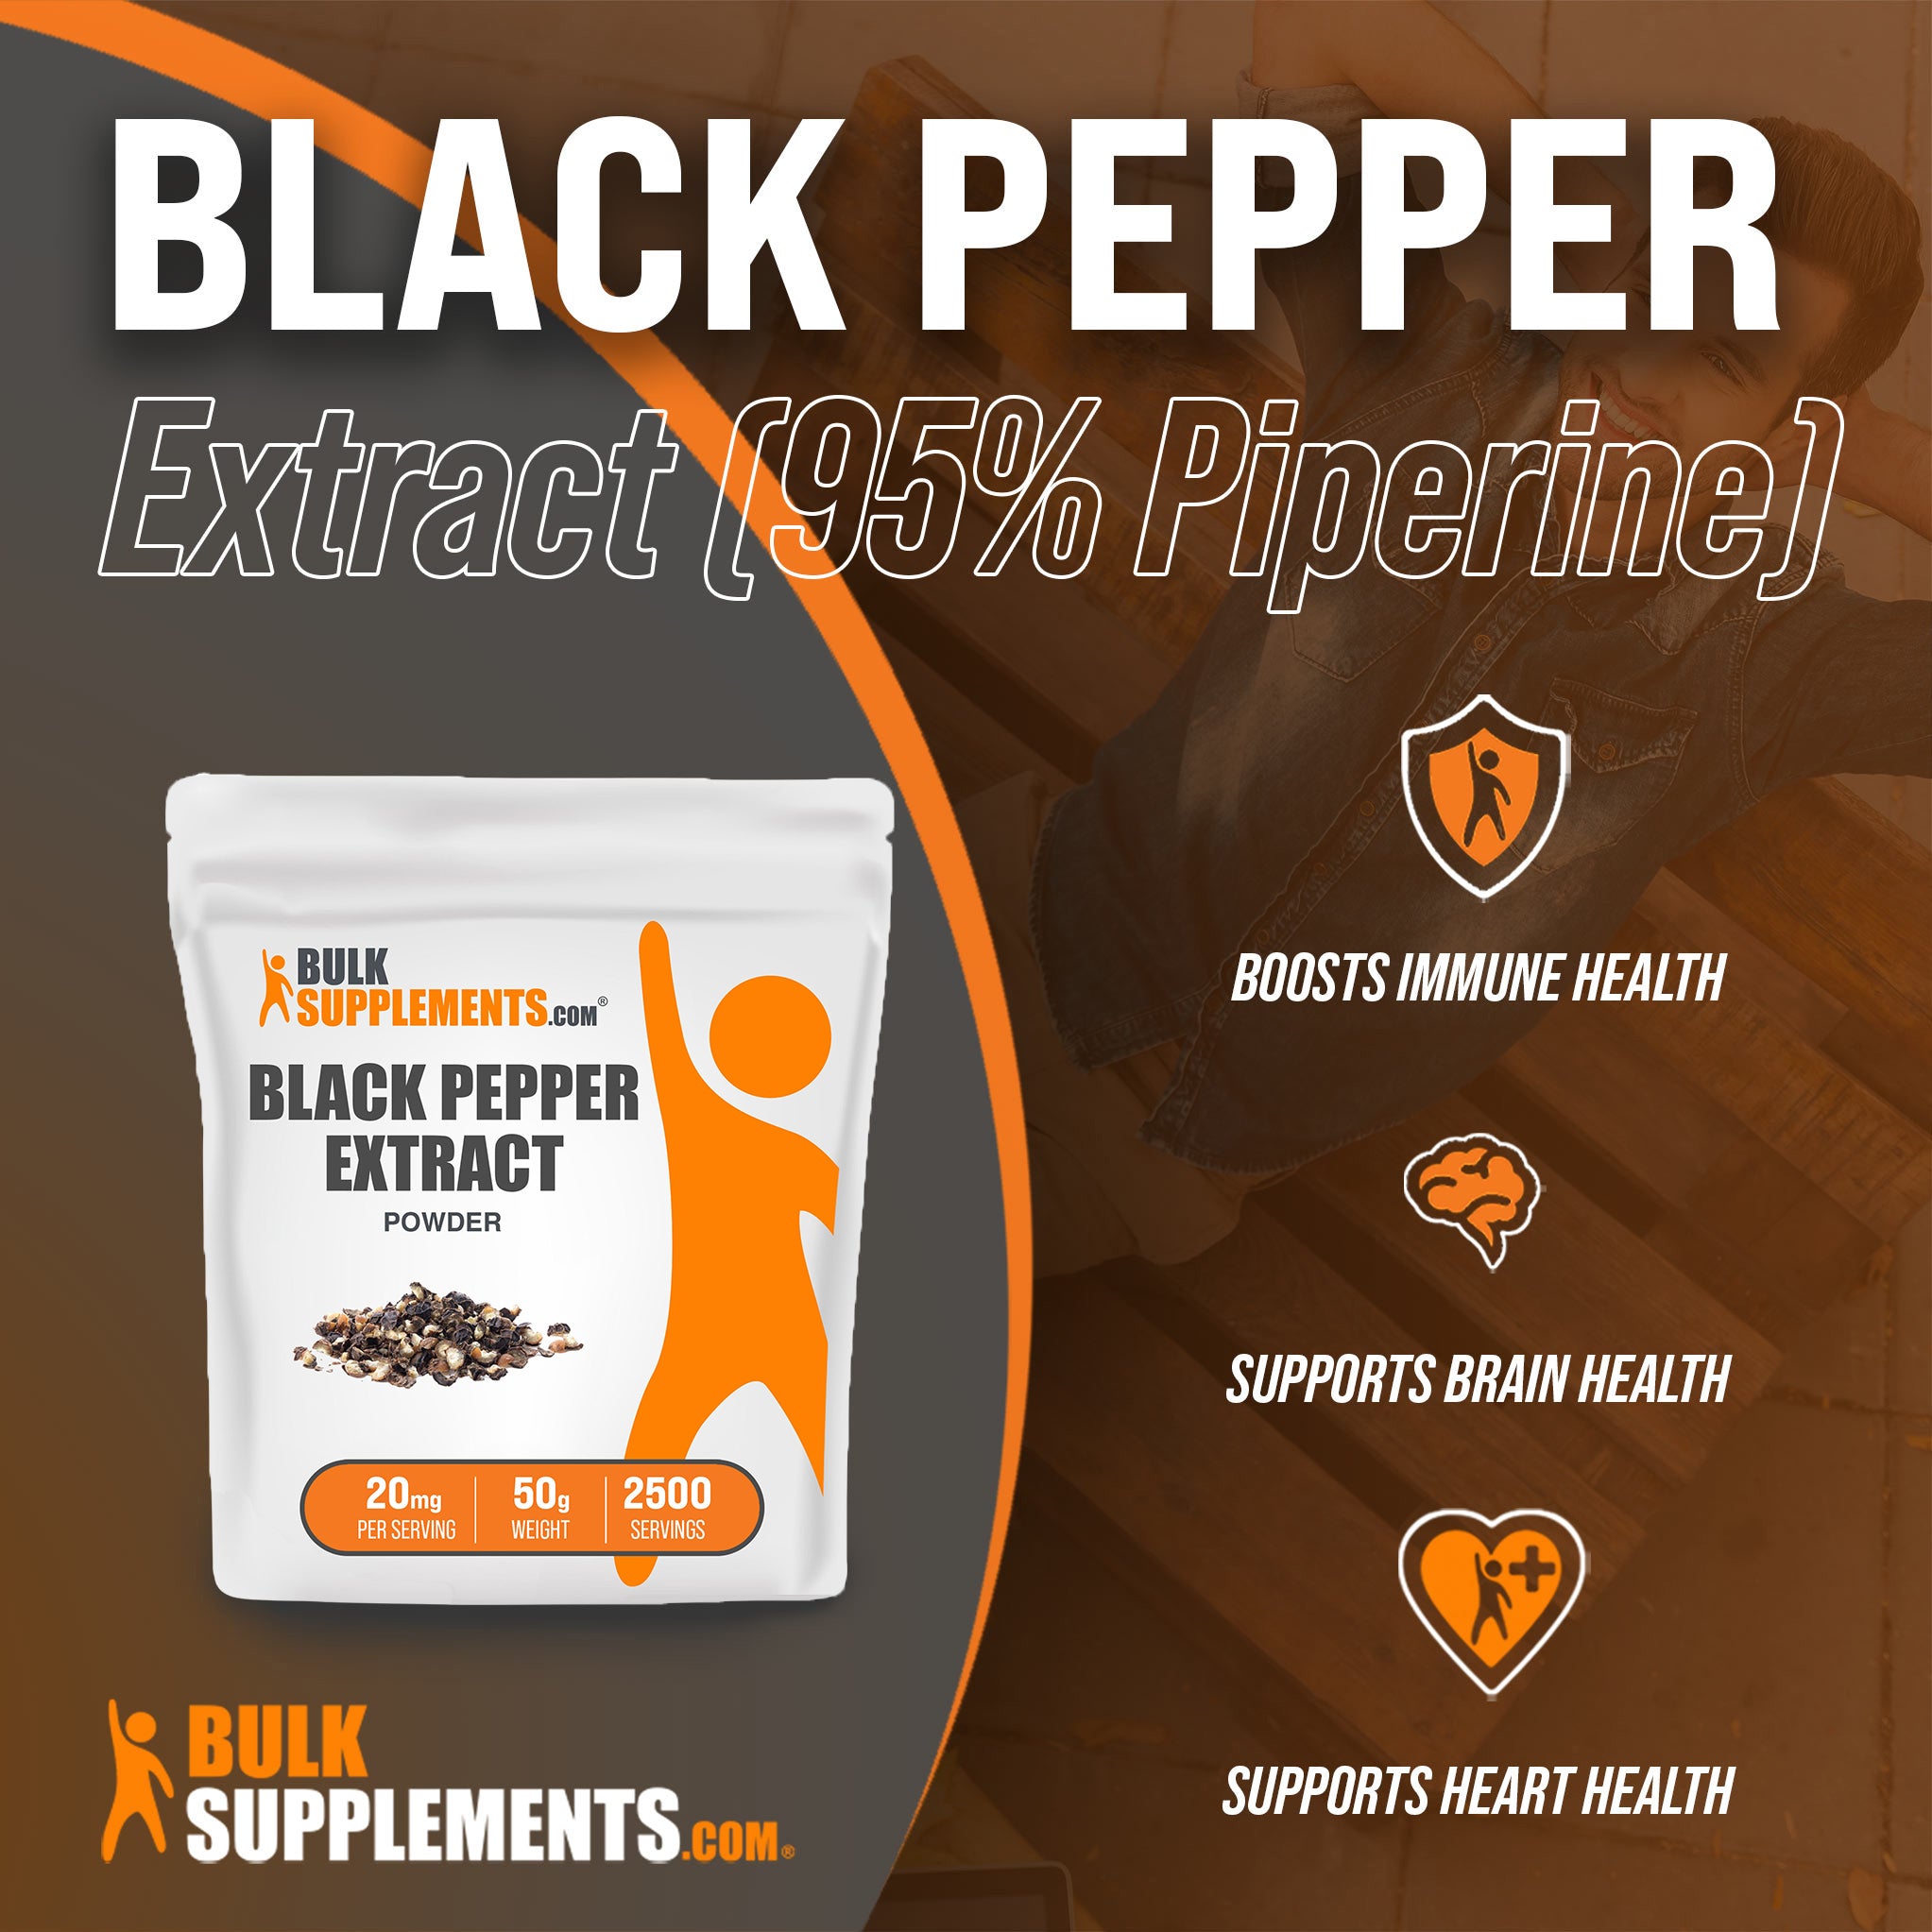 50g bags of black pepper extract are a great source of piperine